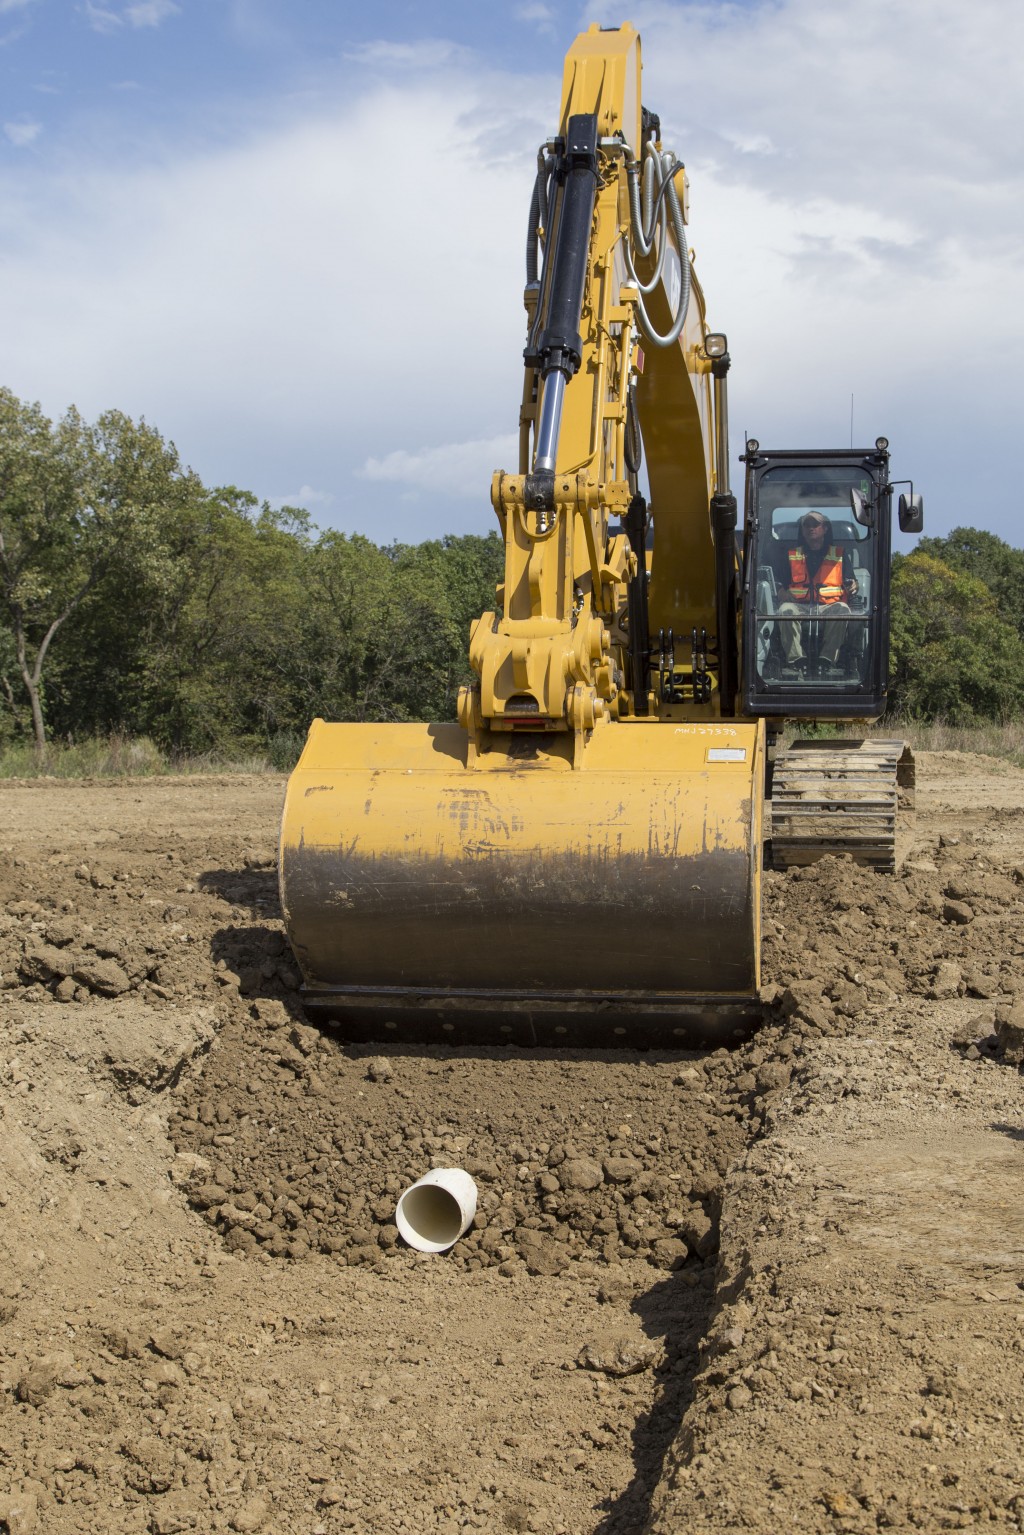 PROTECT features safeguard the operator and machine when working near obstacles and around utility hazards.